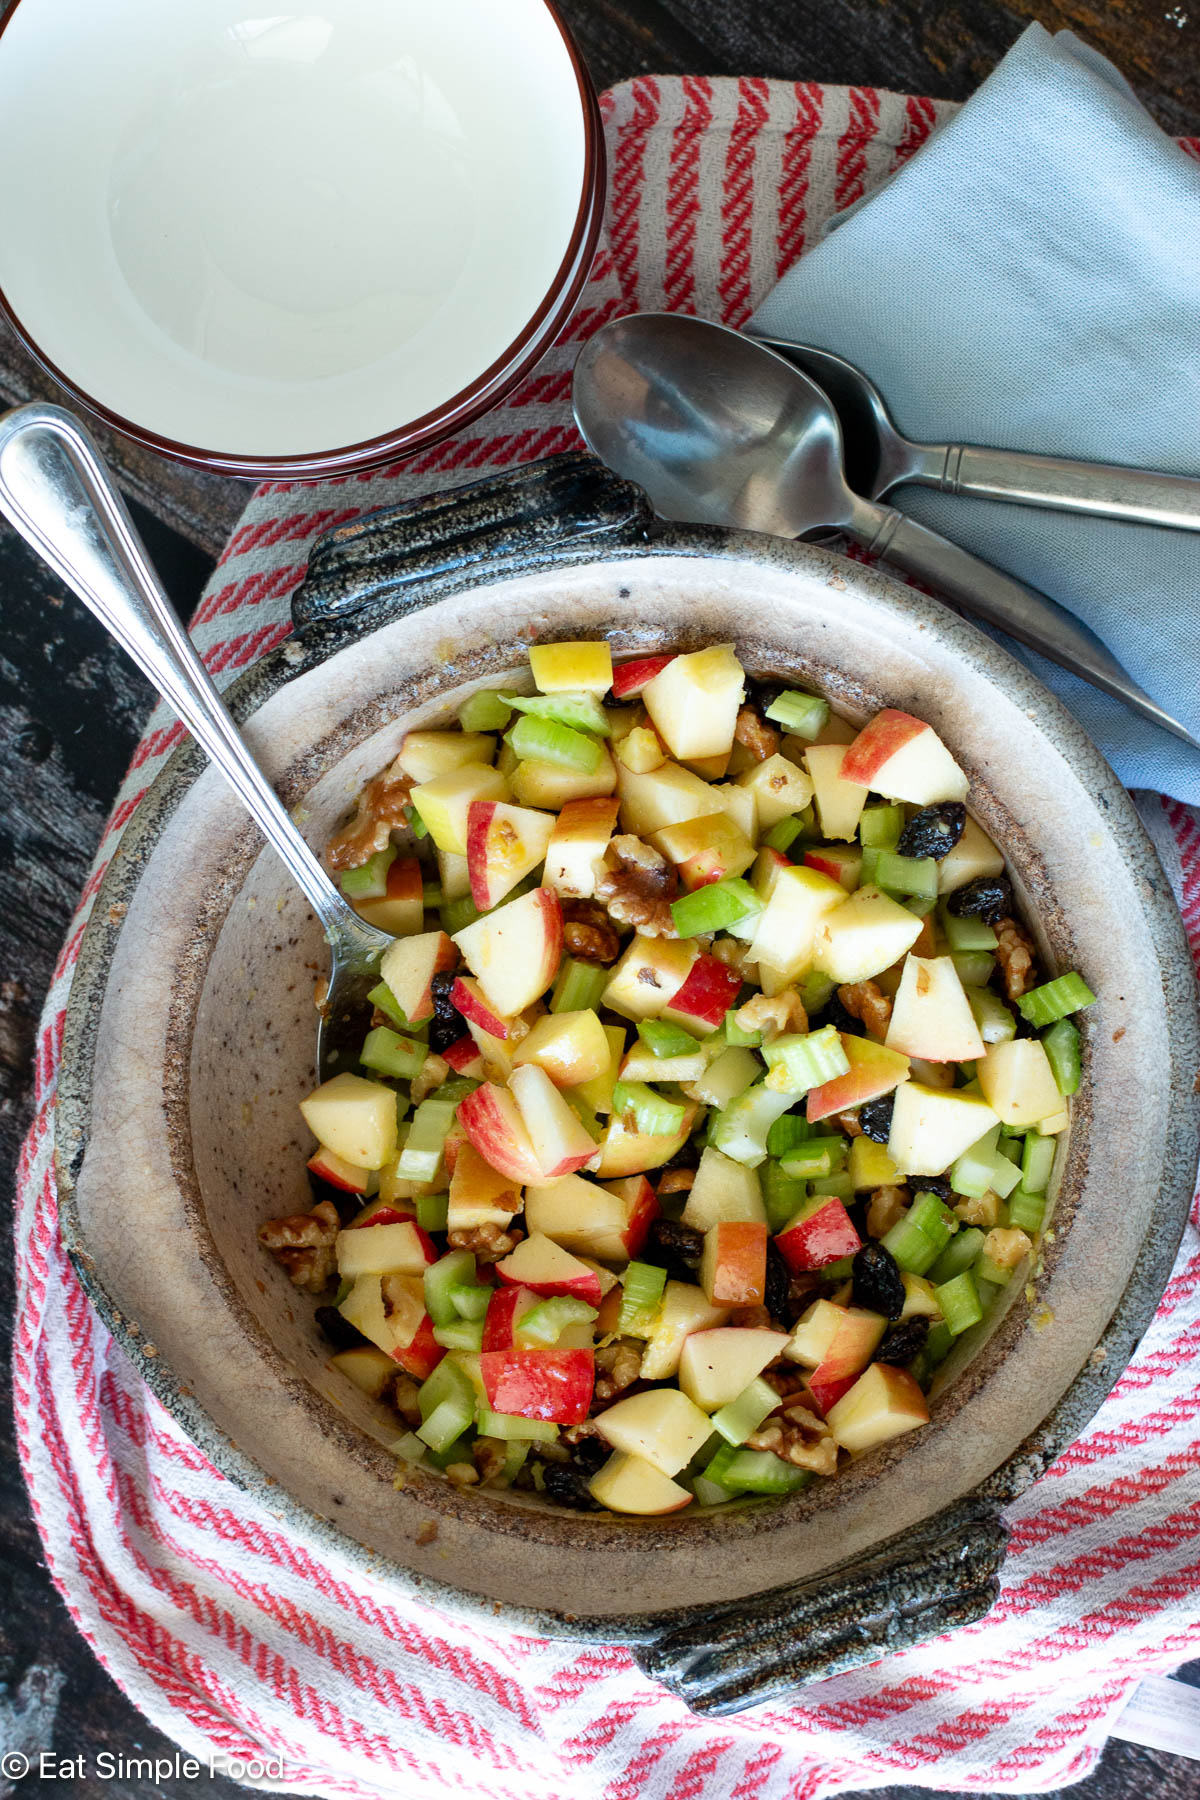 Top view of brown bowl of diced red apples, diced celery, chopped walnuts, and raisins. Spoon sticking out and spoons and white bowls on the side.